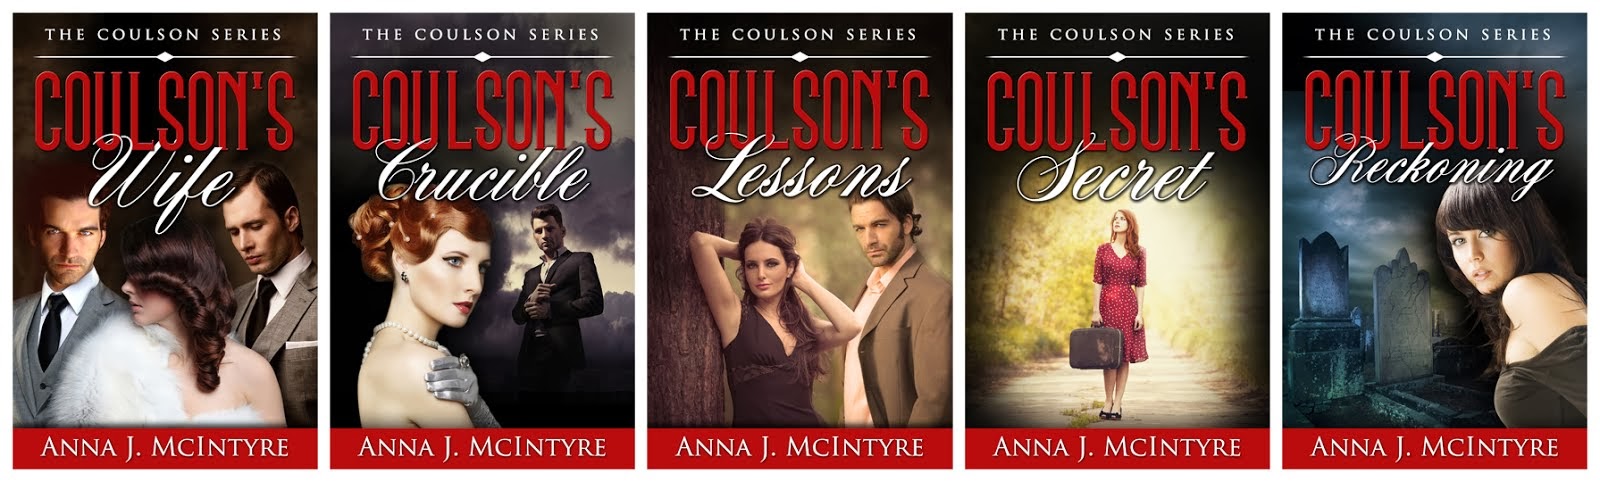 The Coulson Series